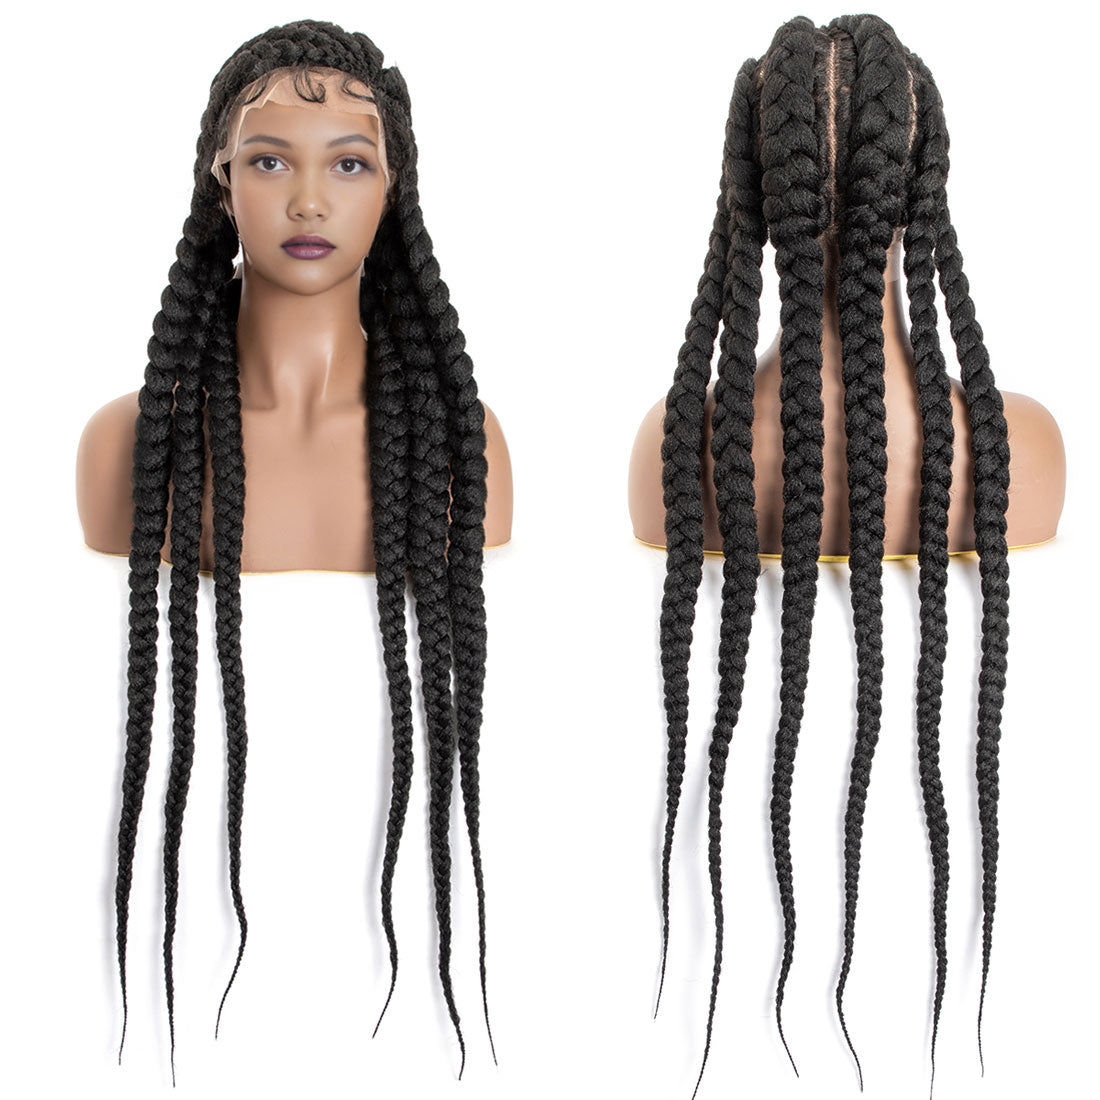 36" Full Lace Cornrow Box Braid Wigs for Black Women Full Knotless Hand-Knitted Synthetic Braided Wigs with Baby Hair(Left Part)